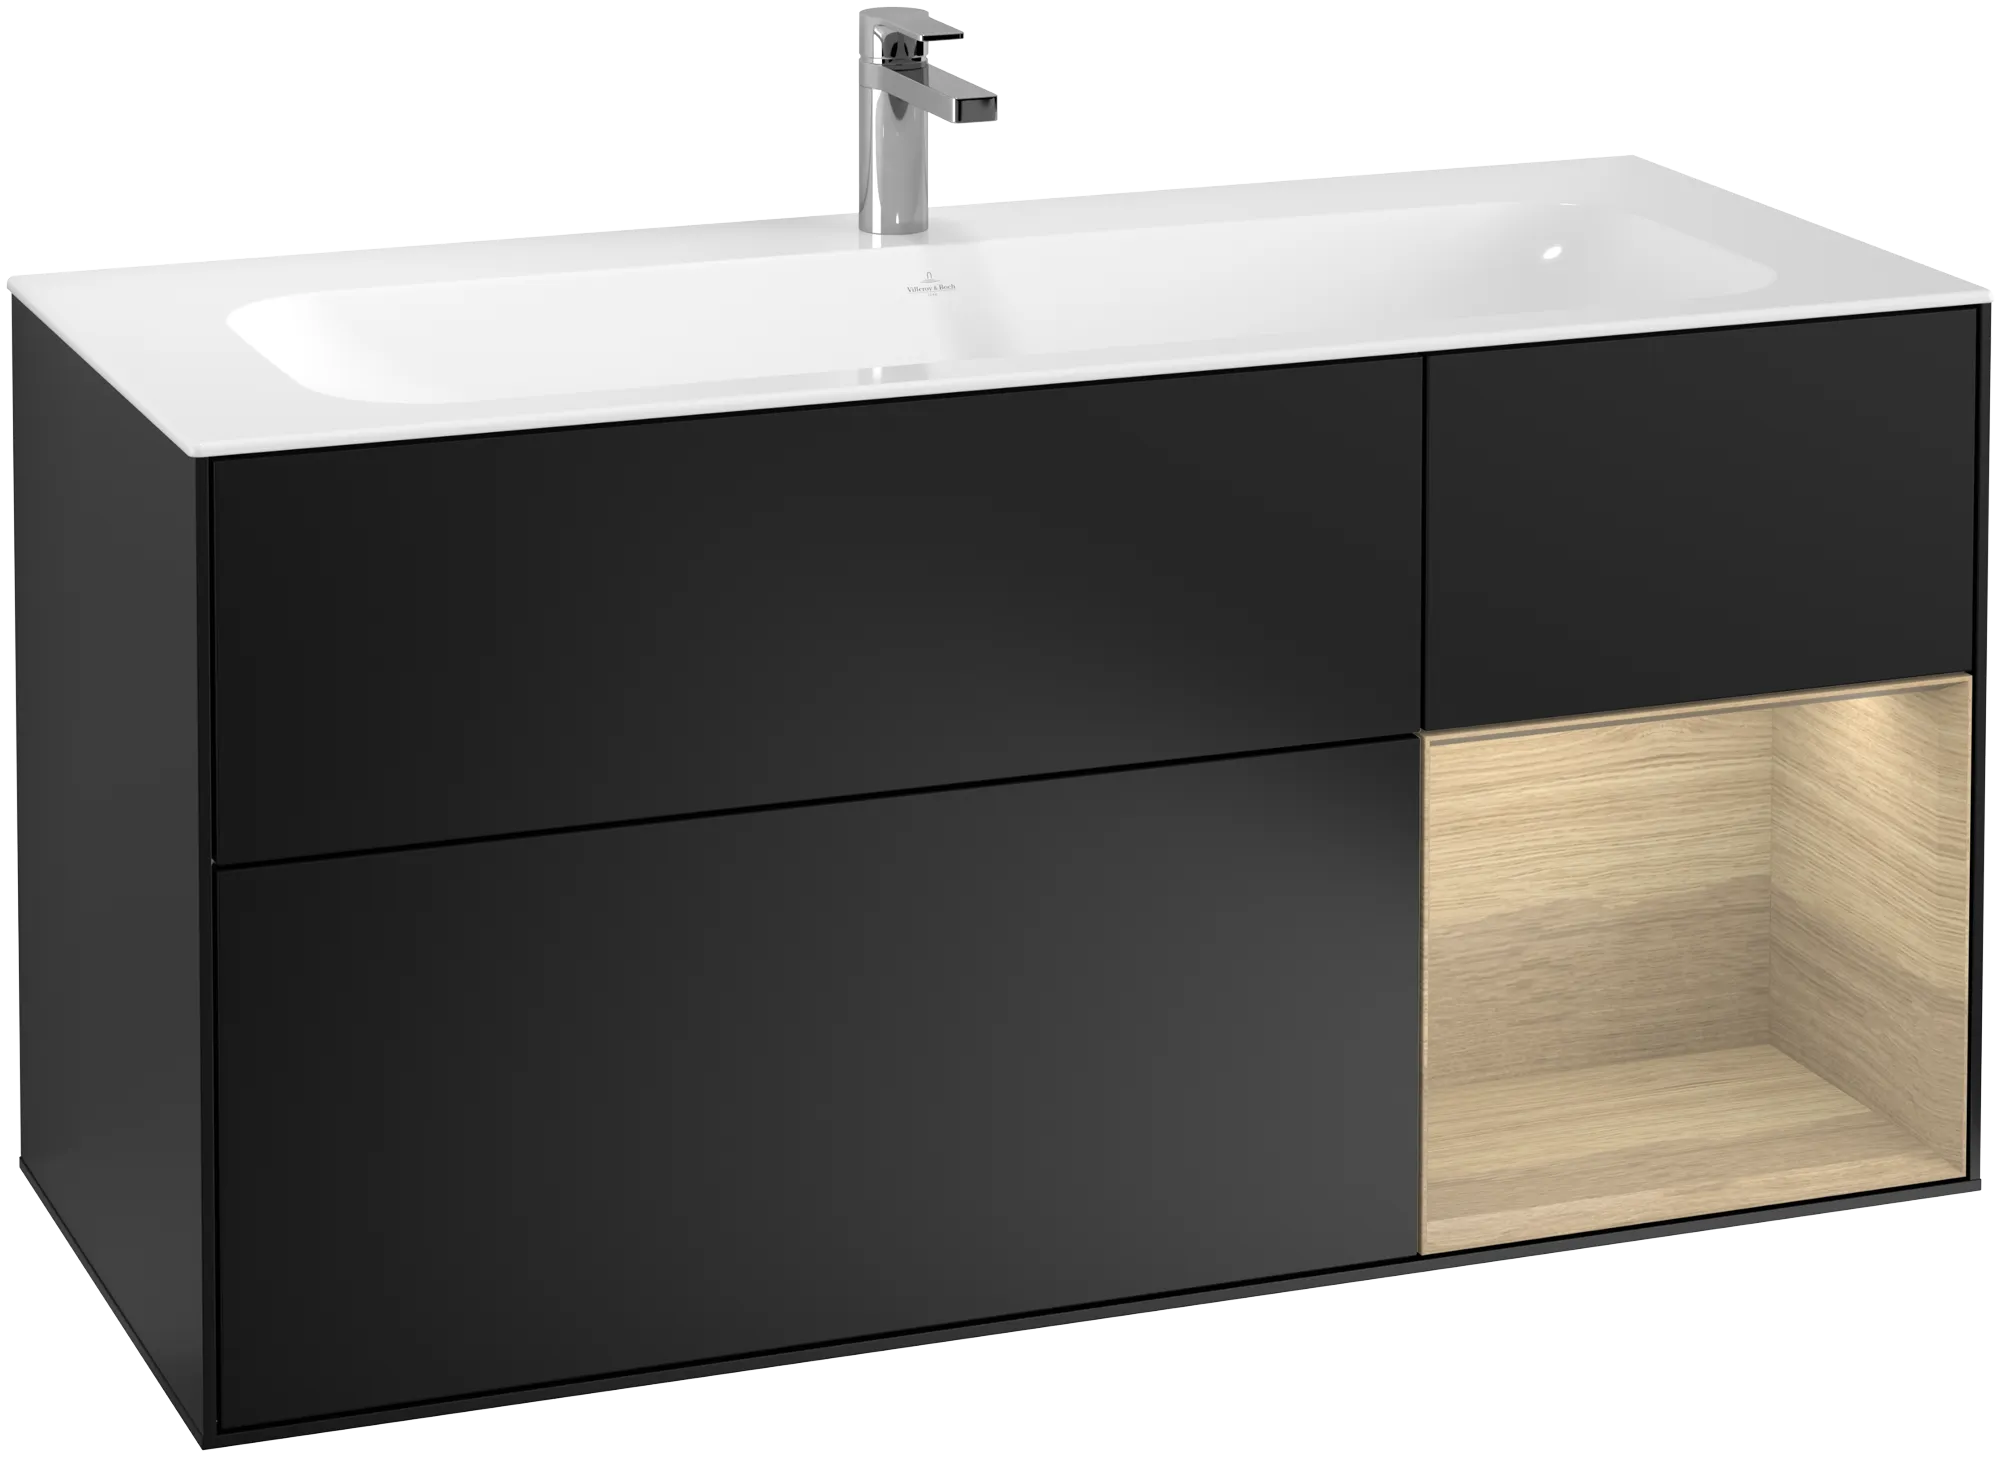 Picture of VILLEROY BOCH Finion Vanity unit, with lighting, 3 pull-out compartments, 1196 x 591 x 498 mm, Black Matt Lacquer / Oak Veneer #G070PCPD